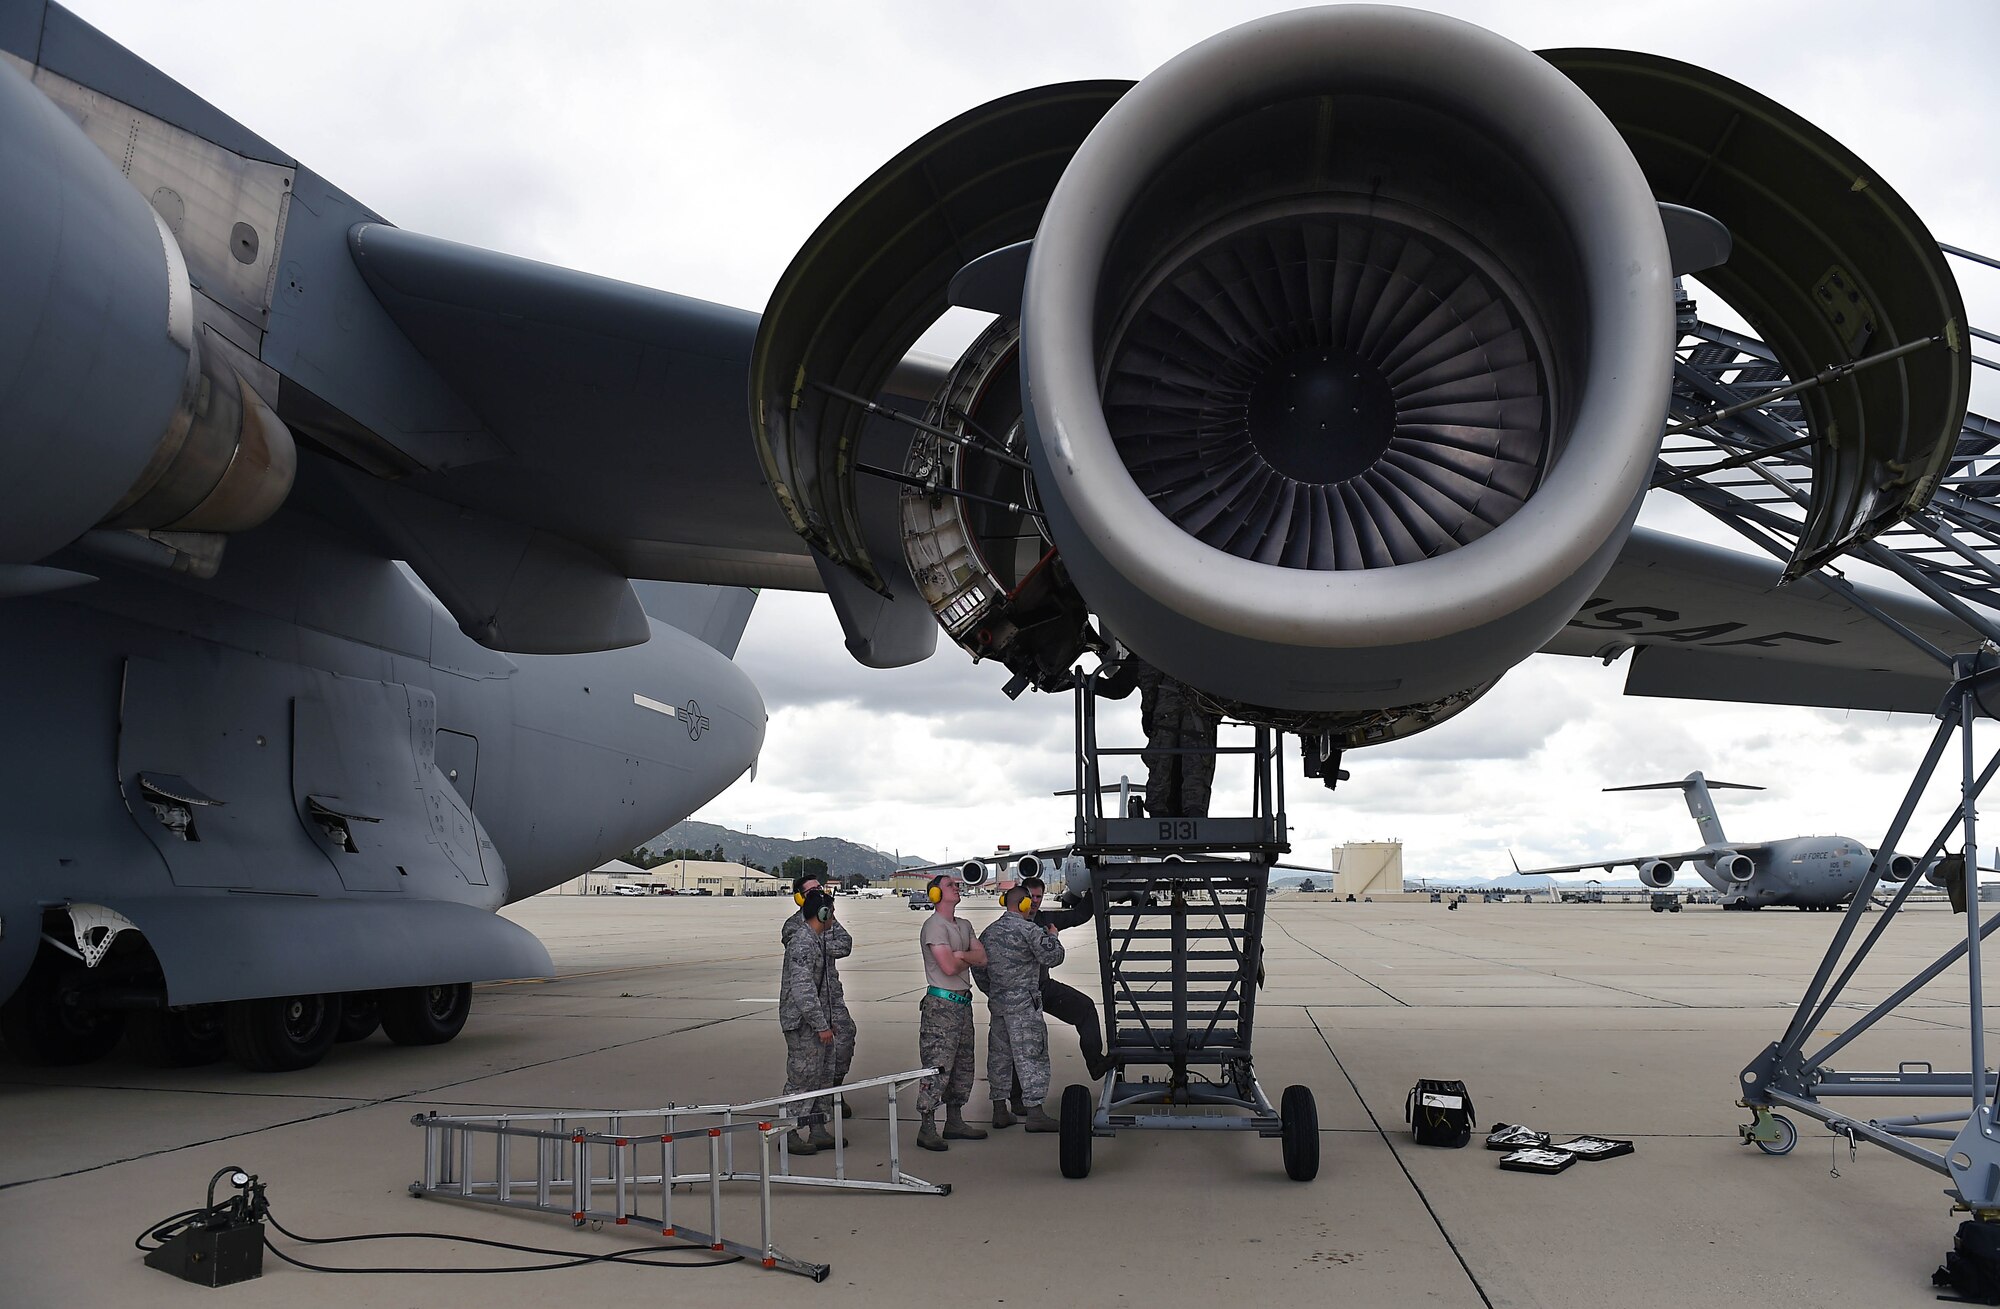 Several crew chiefs from the 62nd Aircraft Maintenance Squadron work to repair the engine of C-17 Globemaster III on March Air Reserve Base in California, April 3, 2019.